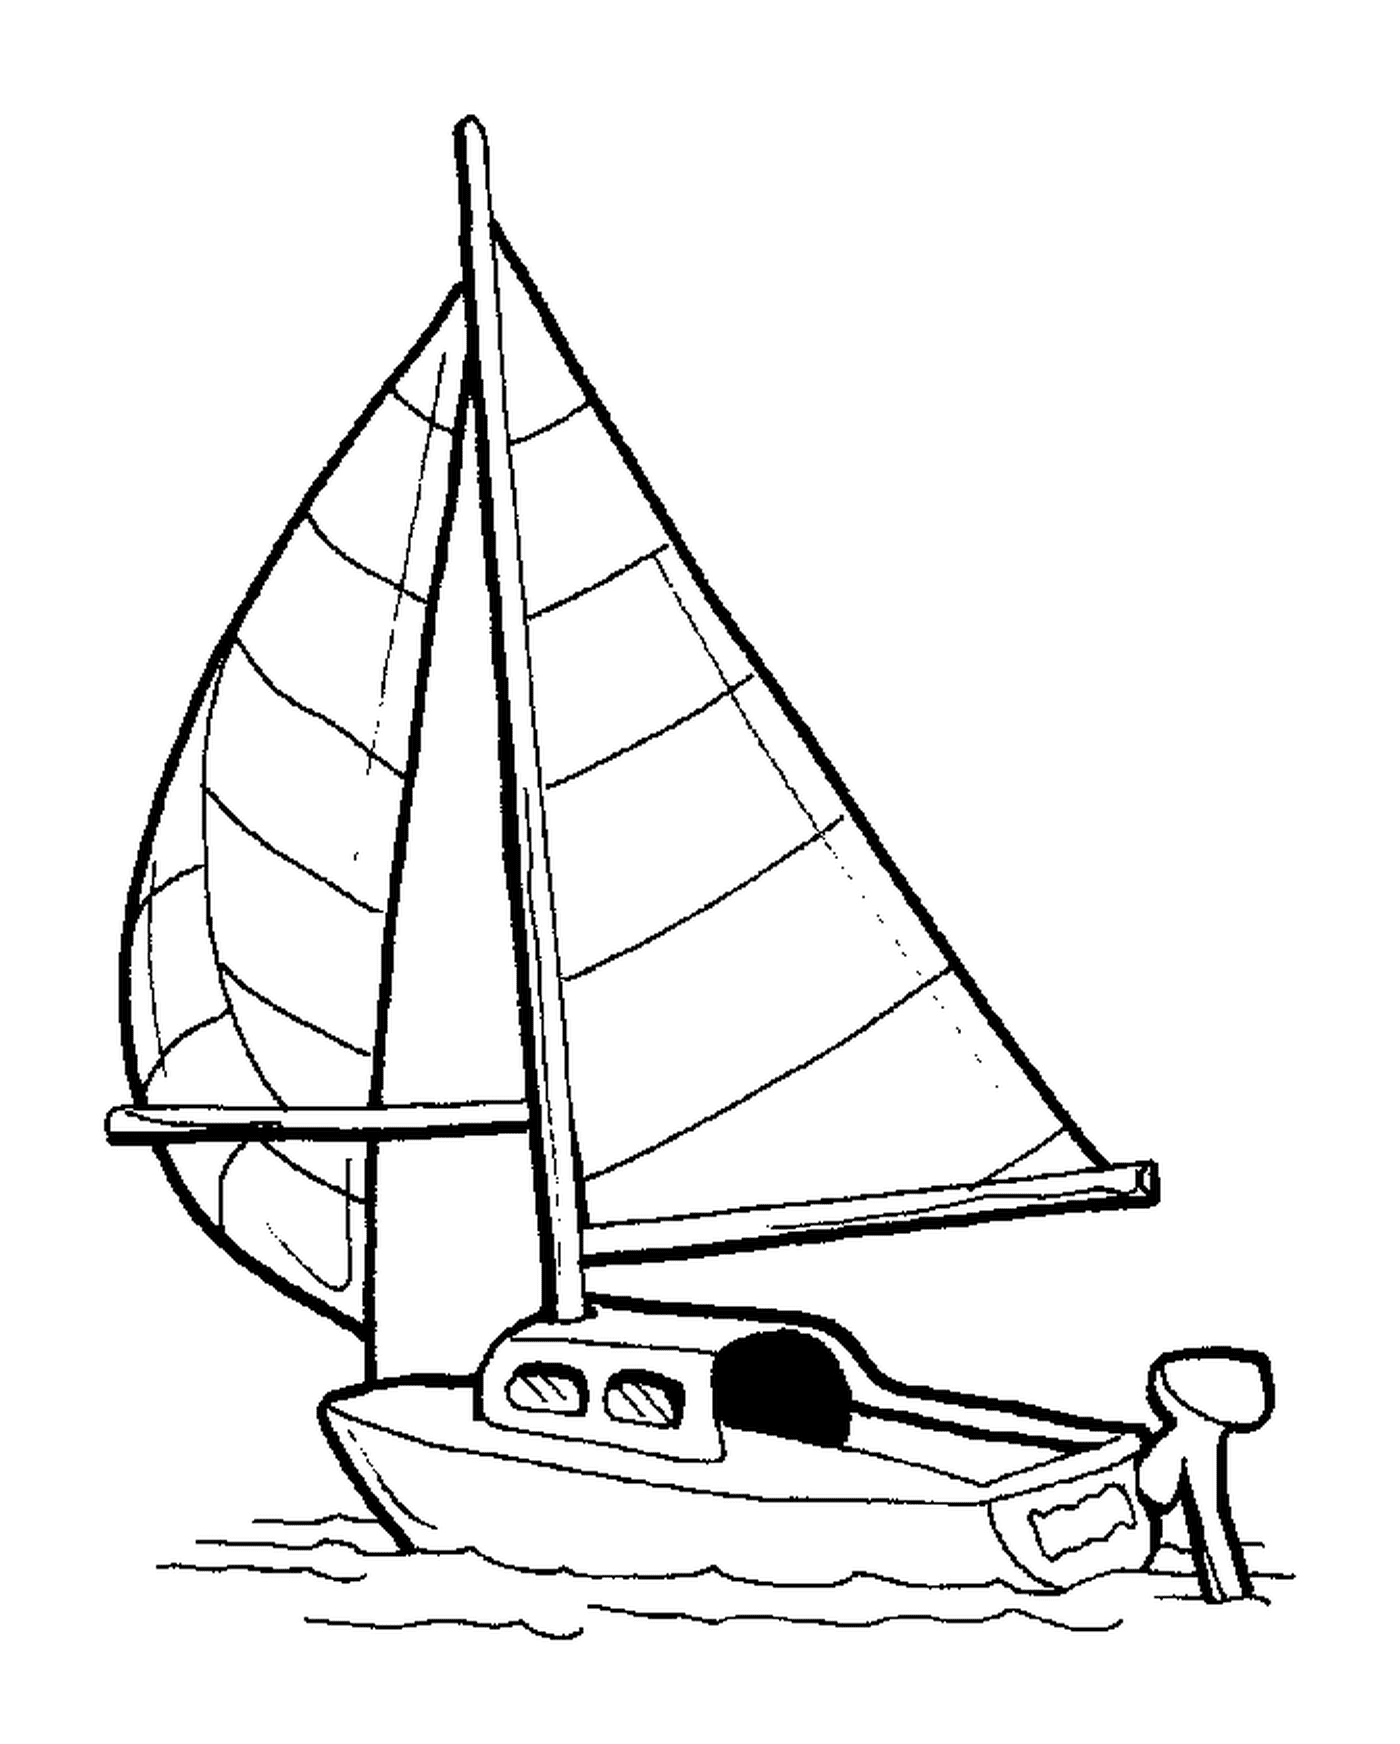  Small sailboat shown in a drawing 